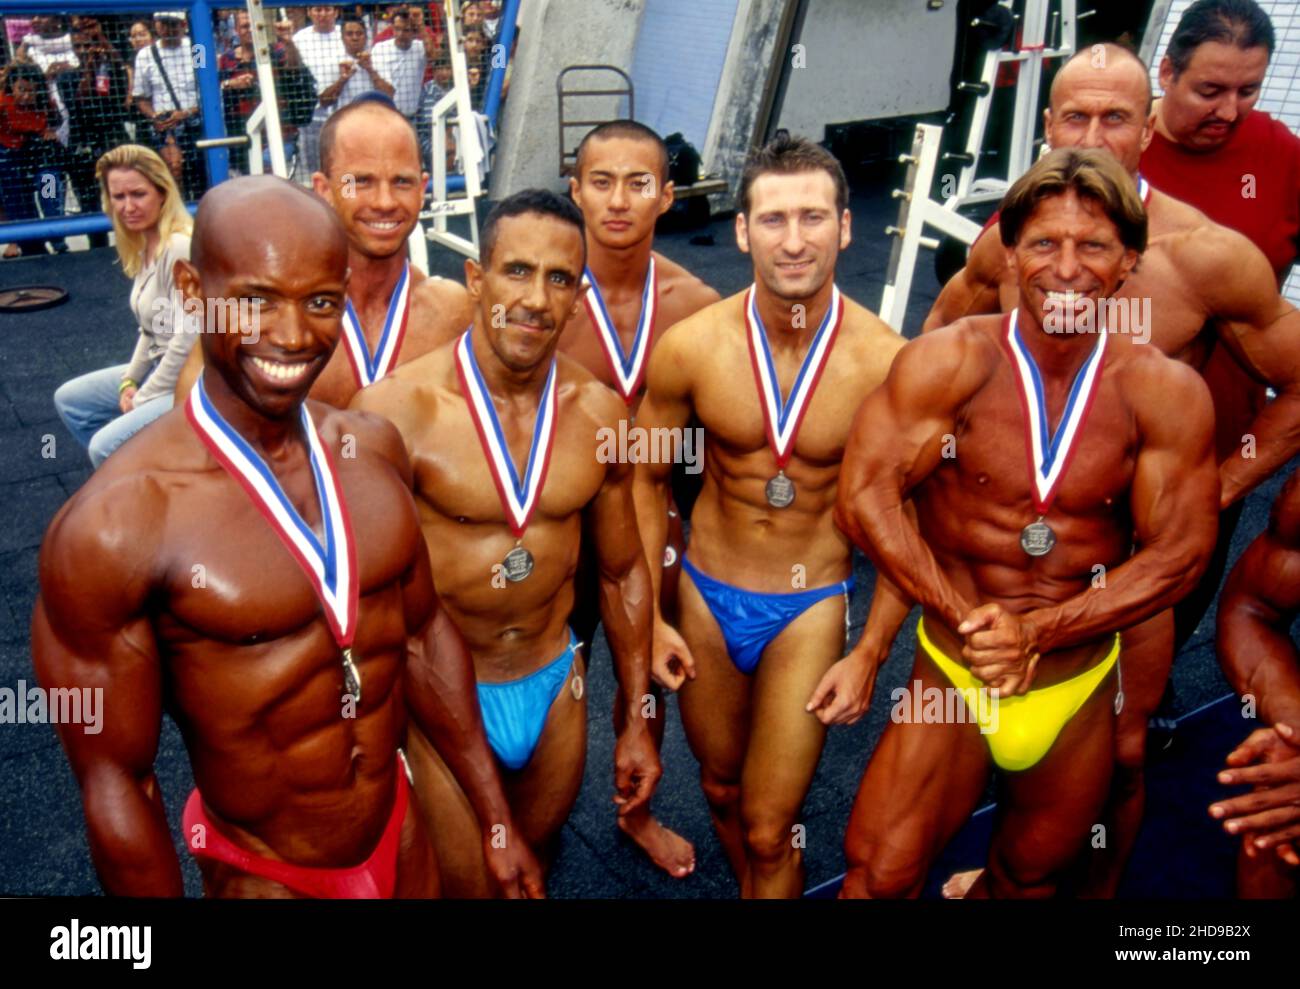 Competitors in bodybuilding competition at Muscle Beach in Venice Beach, CA Stock Photo